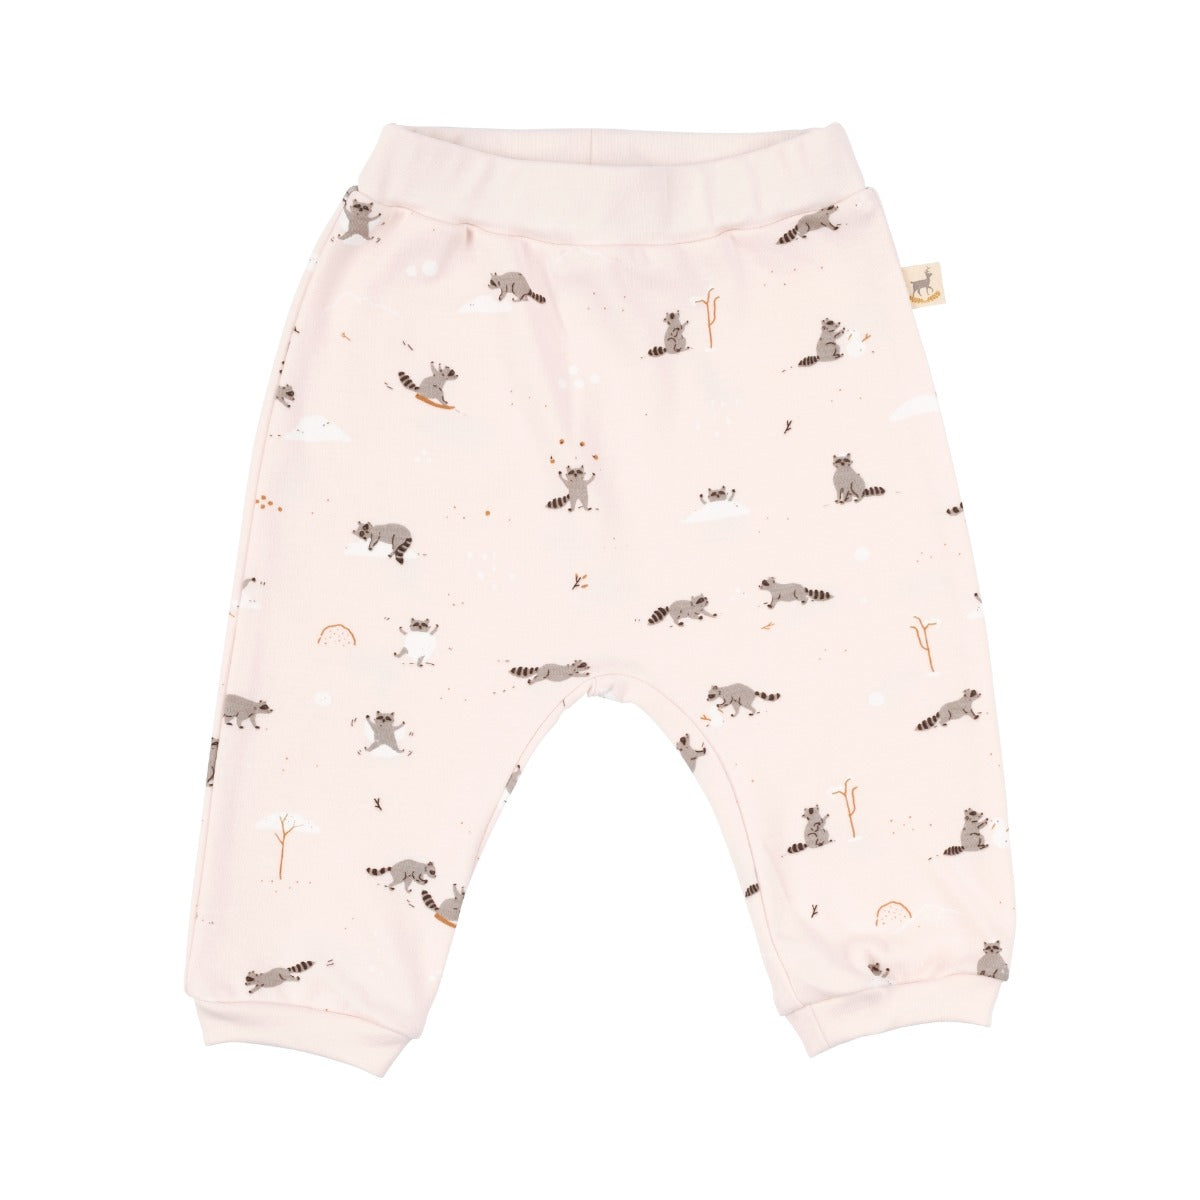 Frolicsome Raccoons Organic Cotton Pants, Pearl